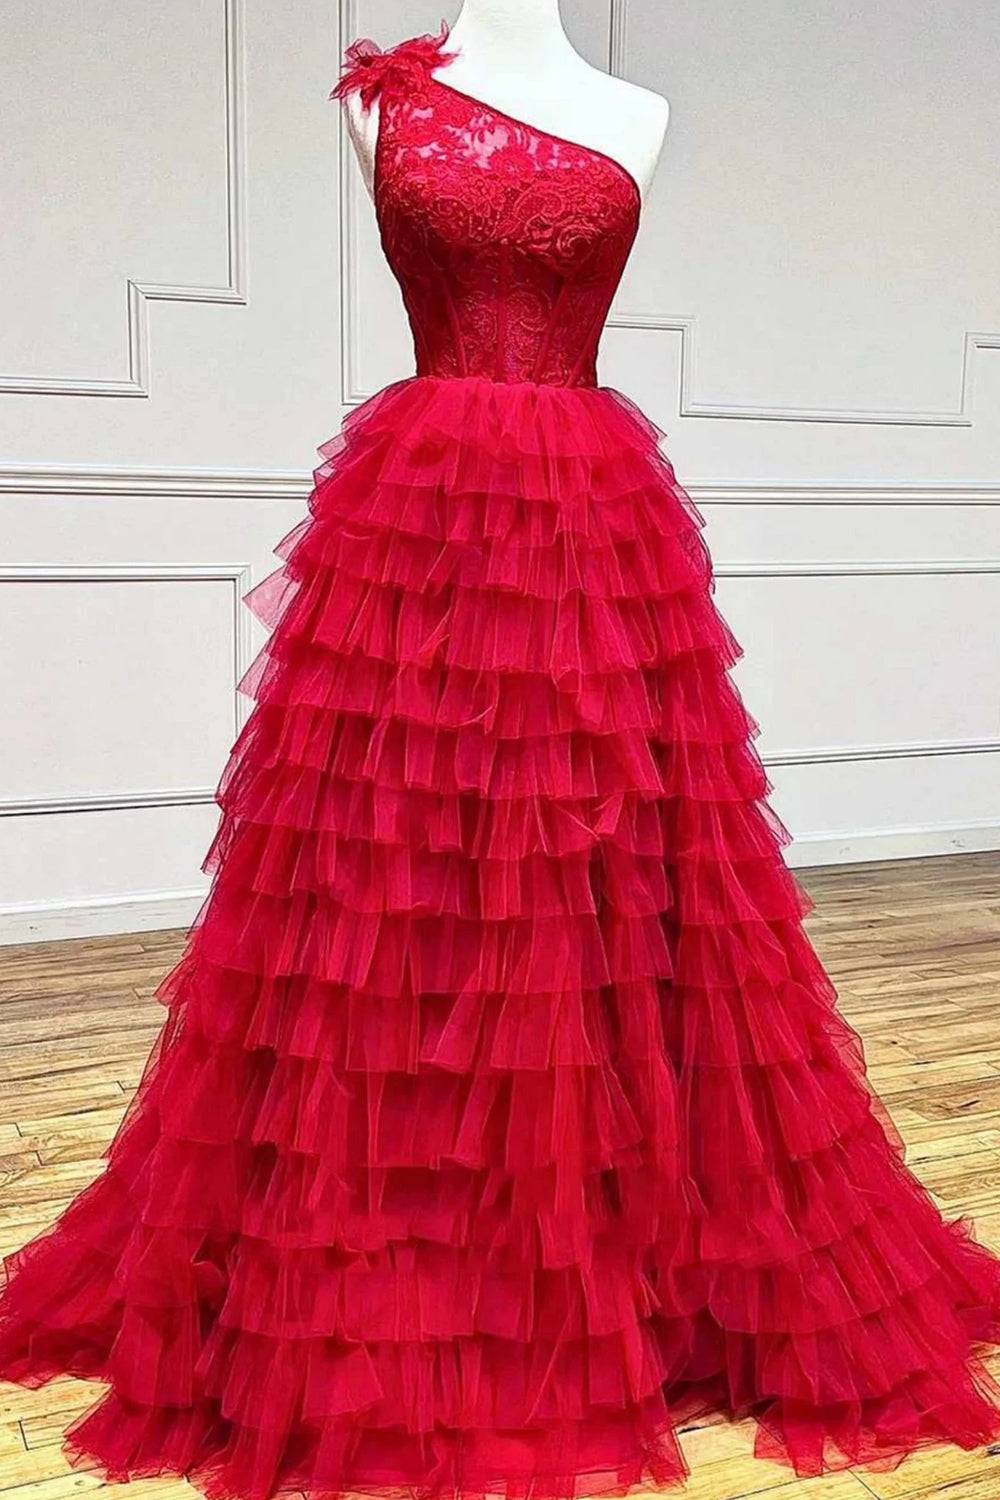 Rustic Wedding, Red One Shoulder Corset Tiered Long Prom Dress with Ruffles